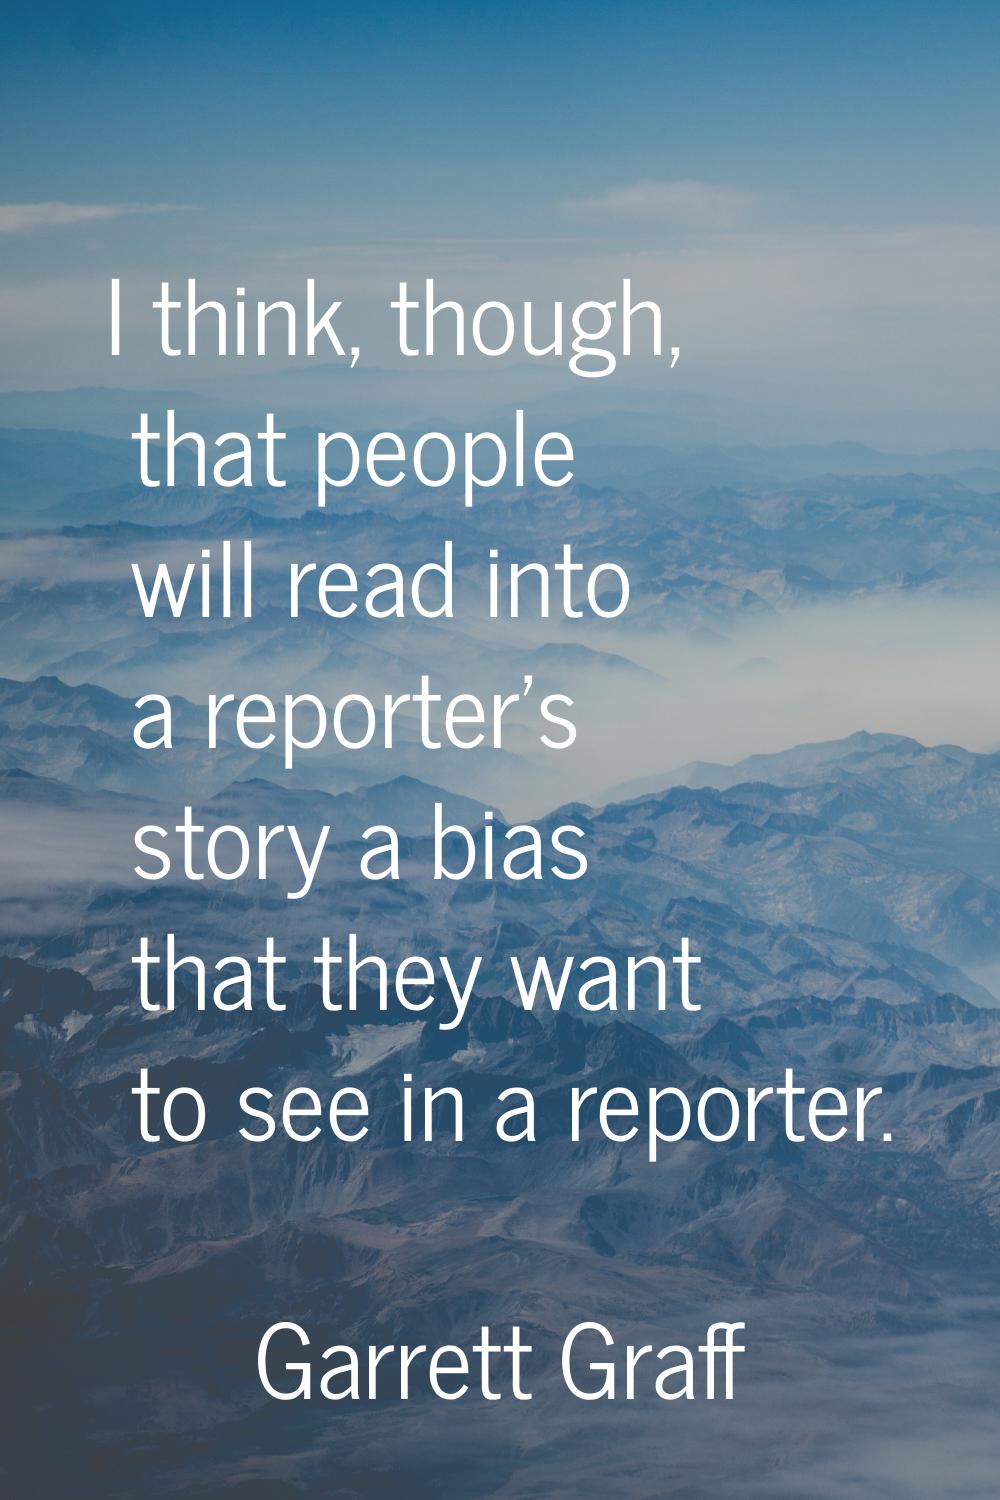 I think, though, that people will read into a reporter's story a bias that they want to see in a re